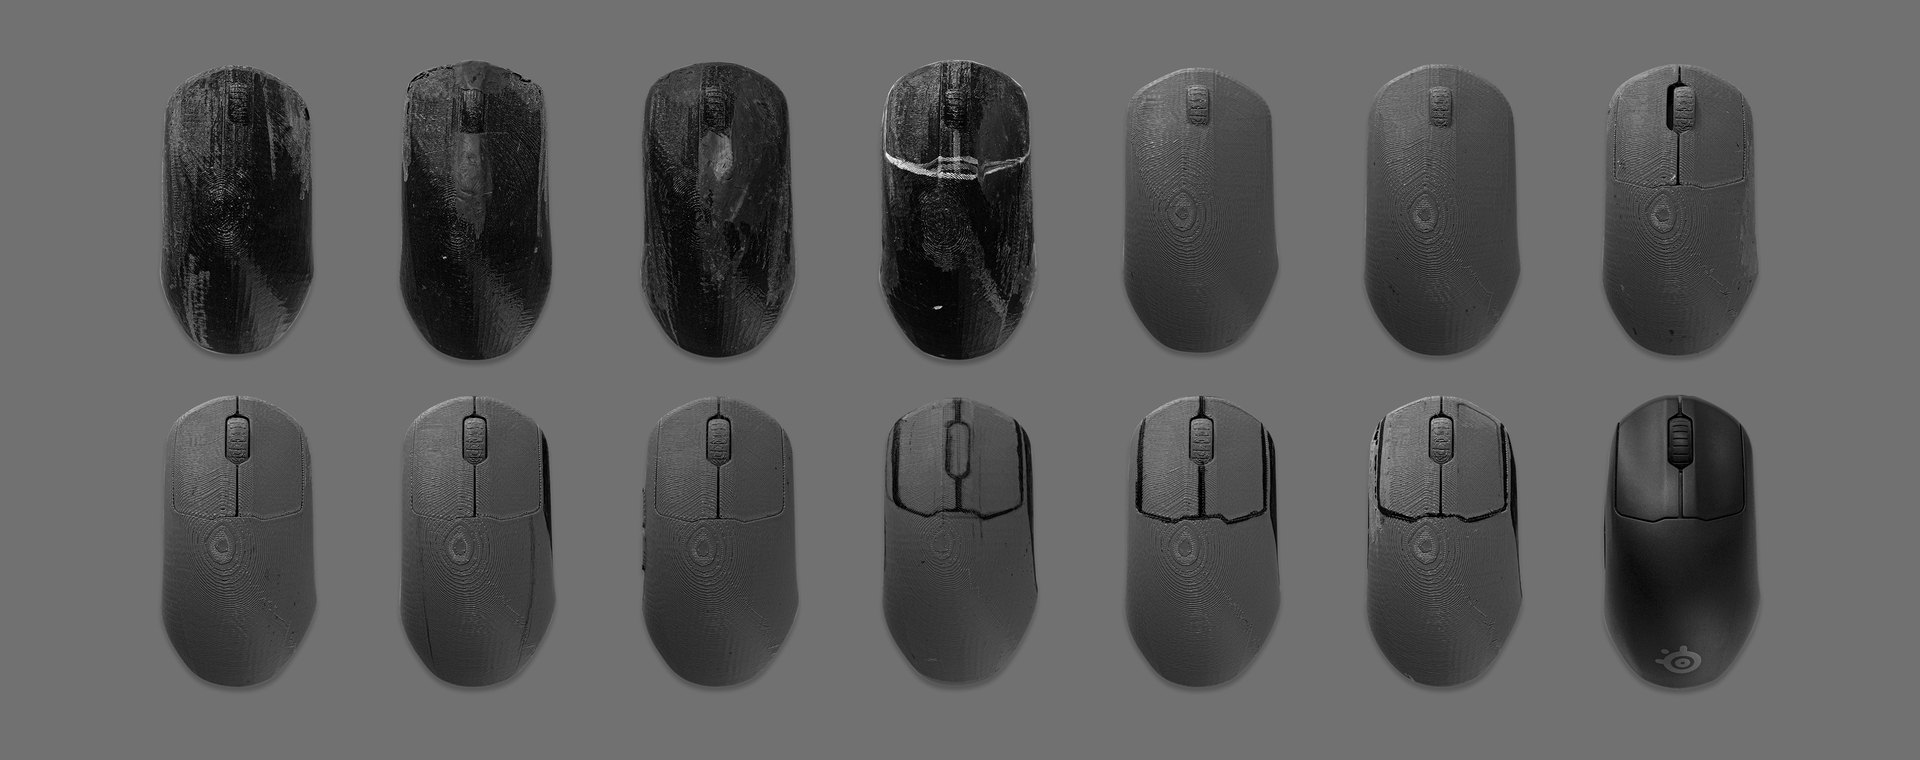 Two rows of mice show a progression in design based on feedback and testing.